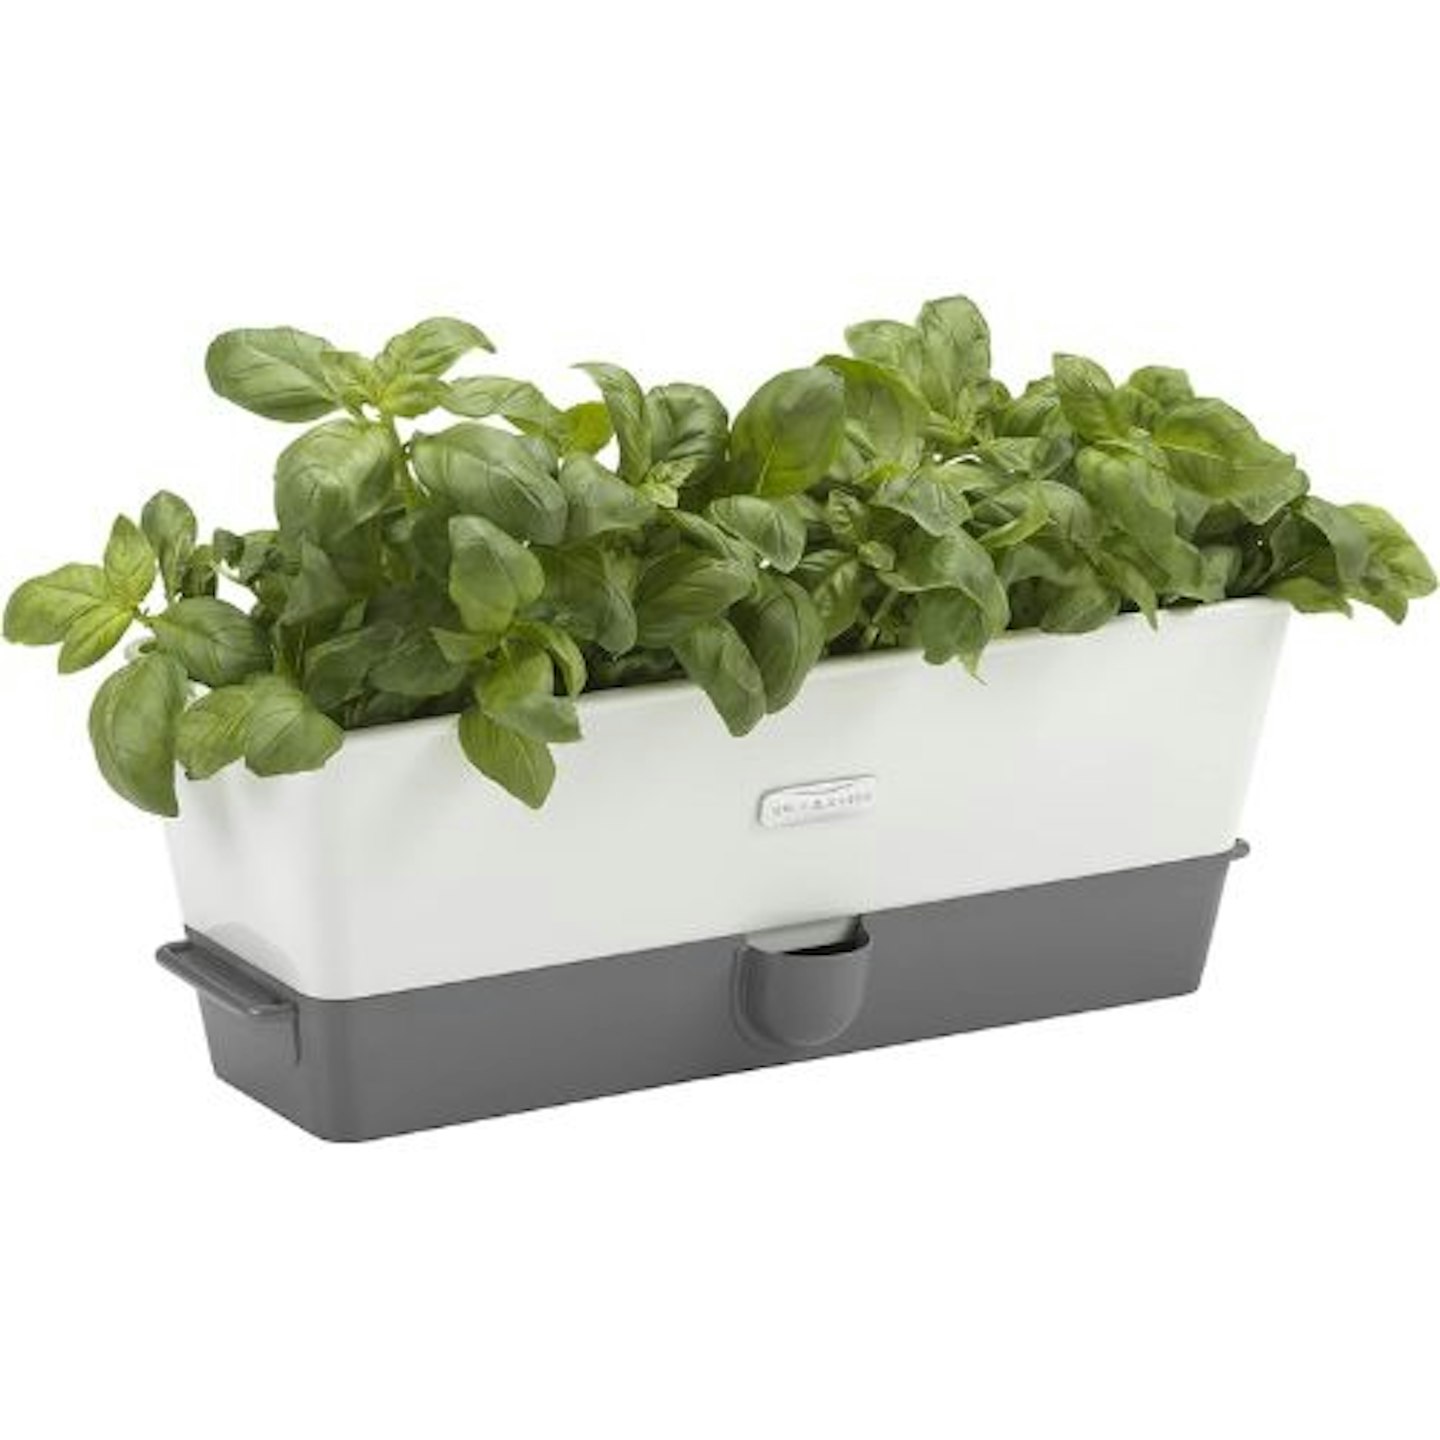 Cole & Mason Burwell Self-Watering Potted Herb Saver